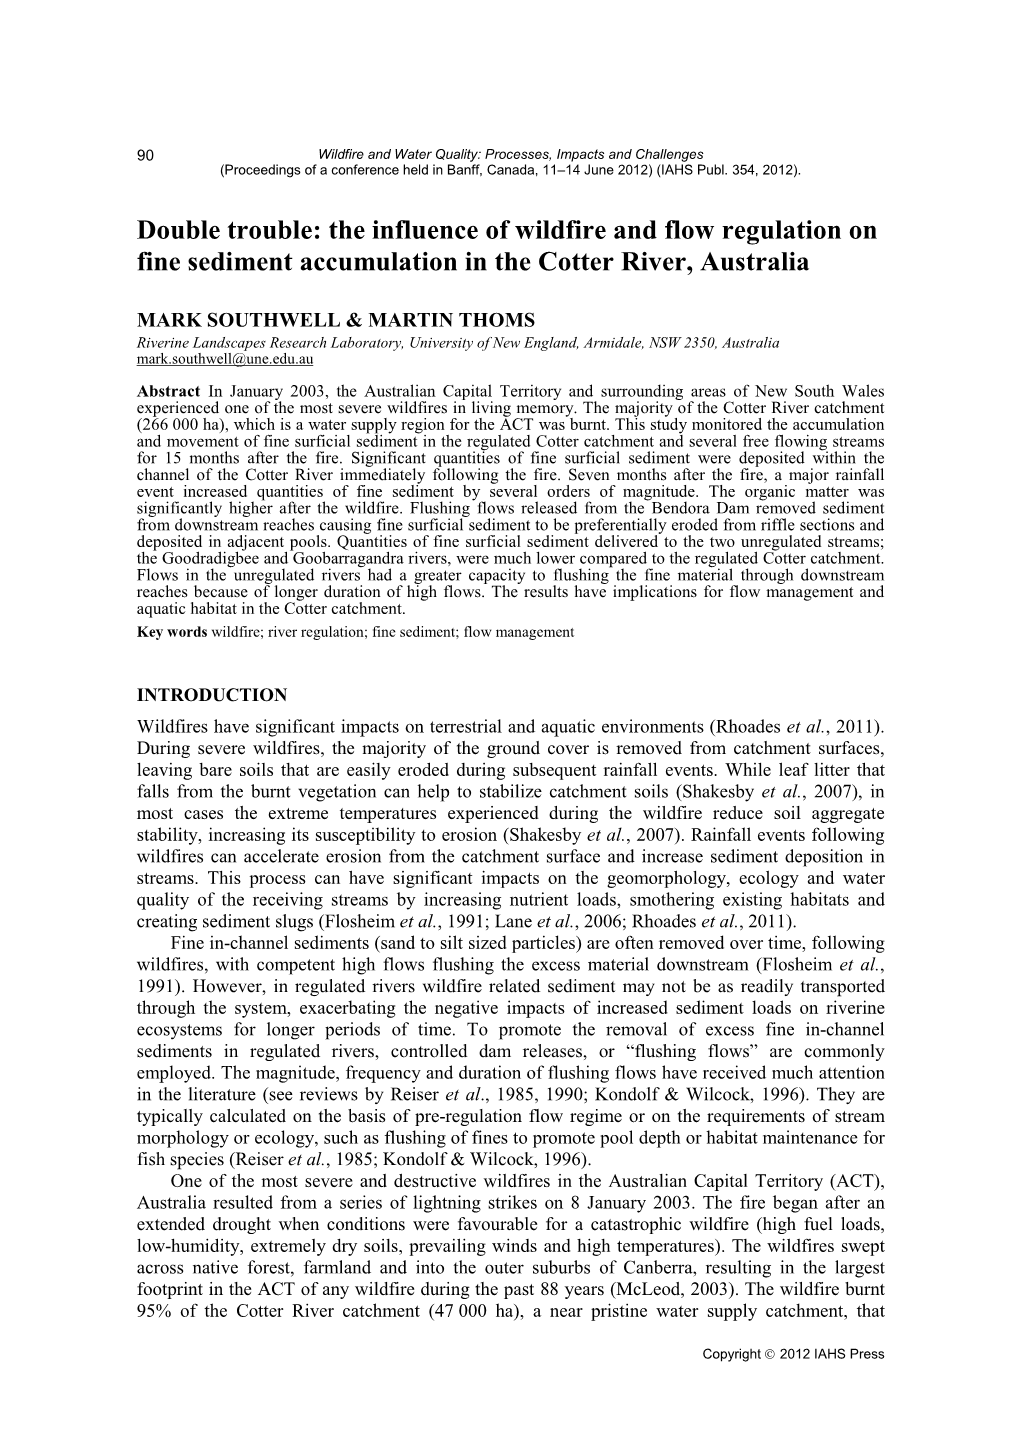 The Influence of Wildfire and Flow Regulation on Fine Sediment Accumulation in the Cotter River, Australia